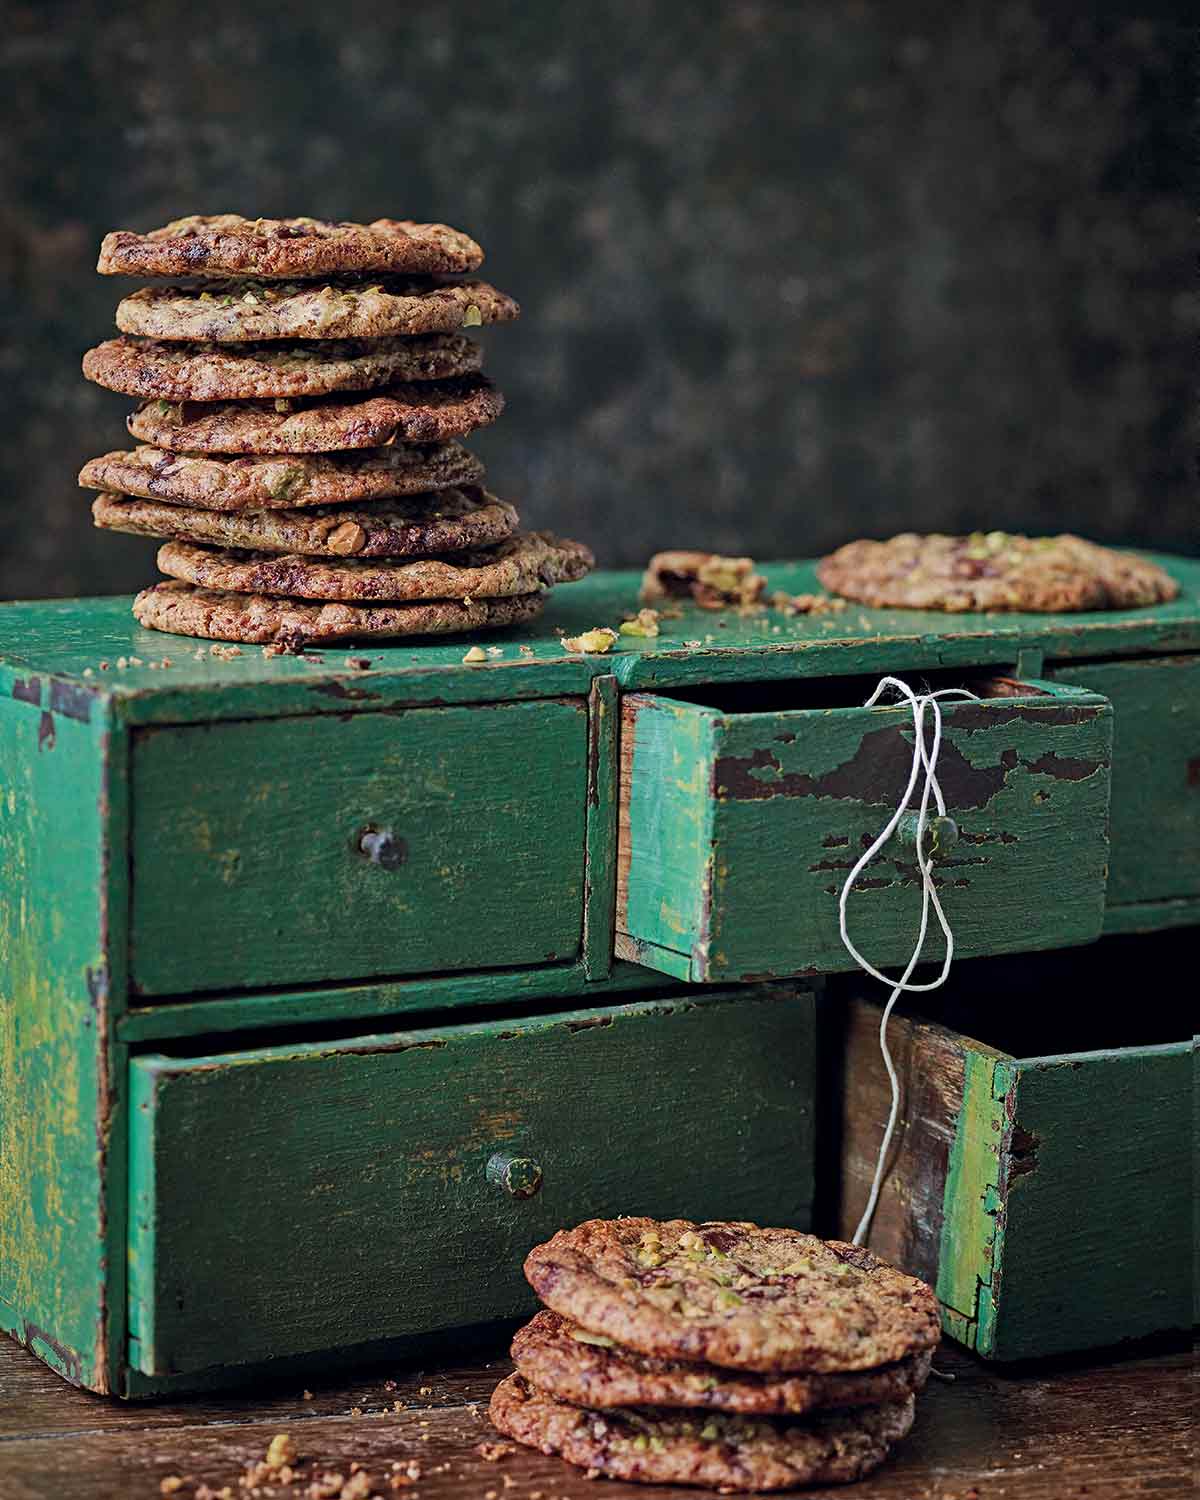 Clove cinnamon and chocolate cookies stacked up on a green cupboard with twine and another stack of cookies in front.